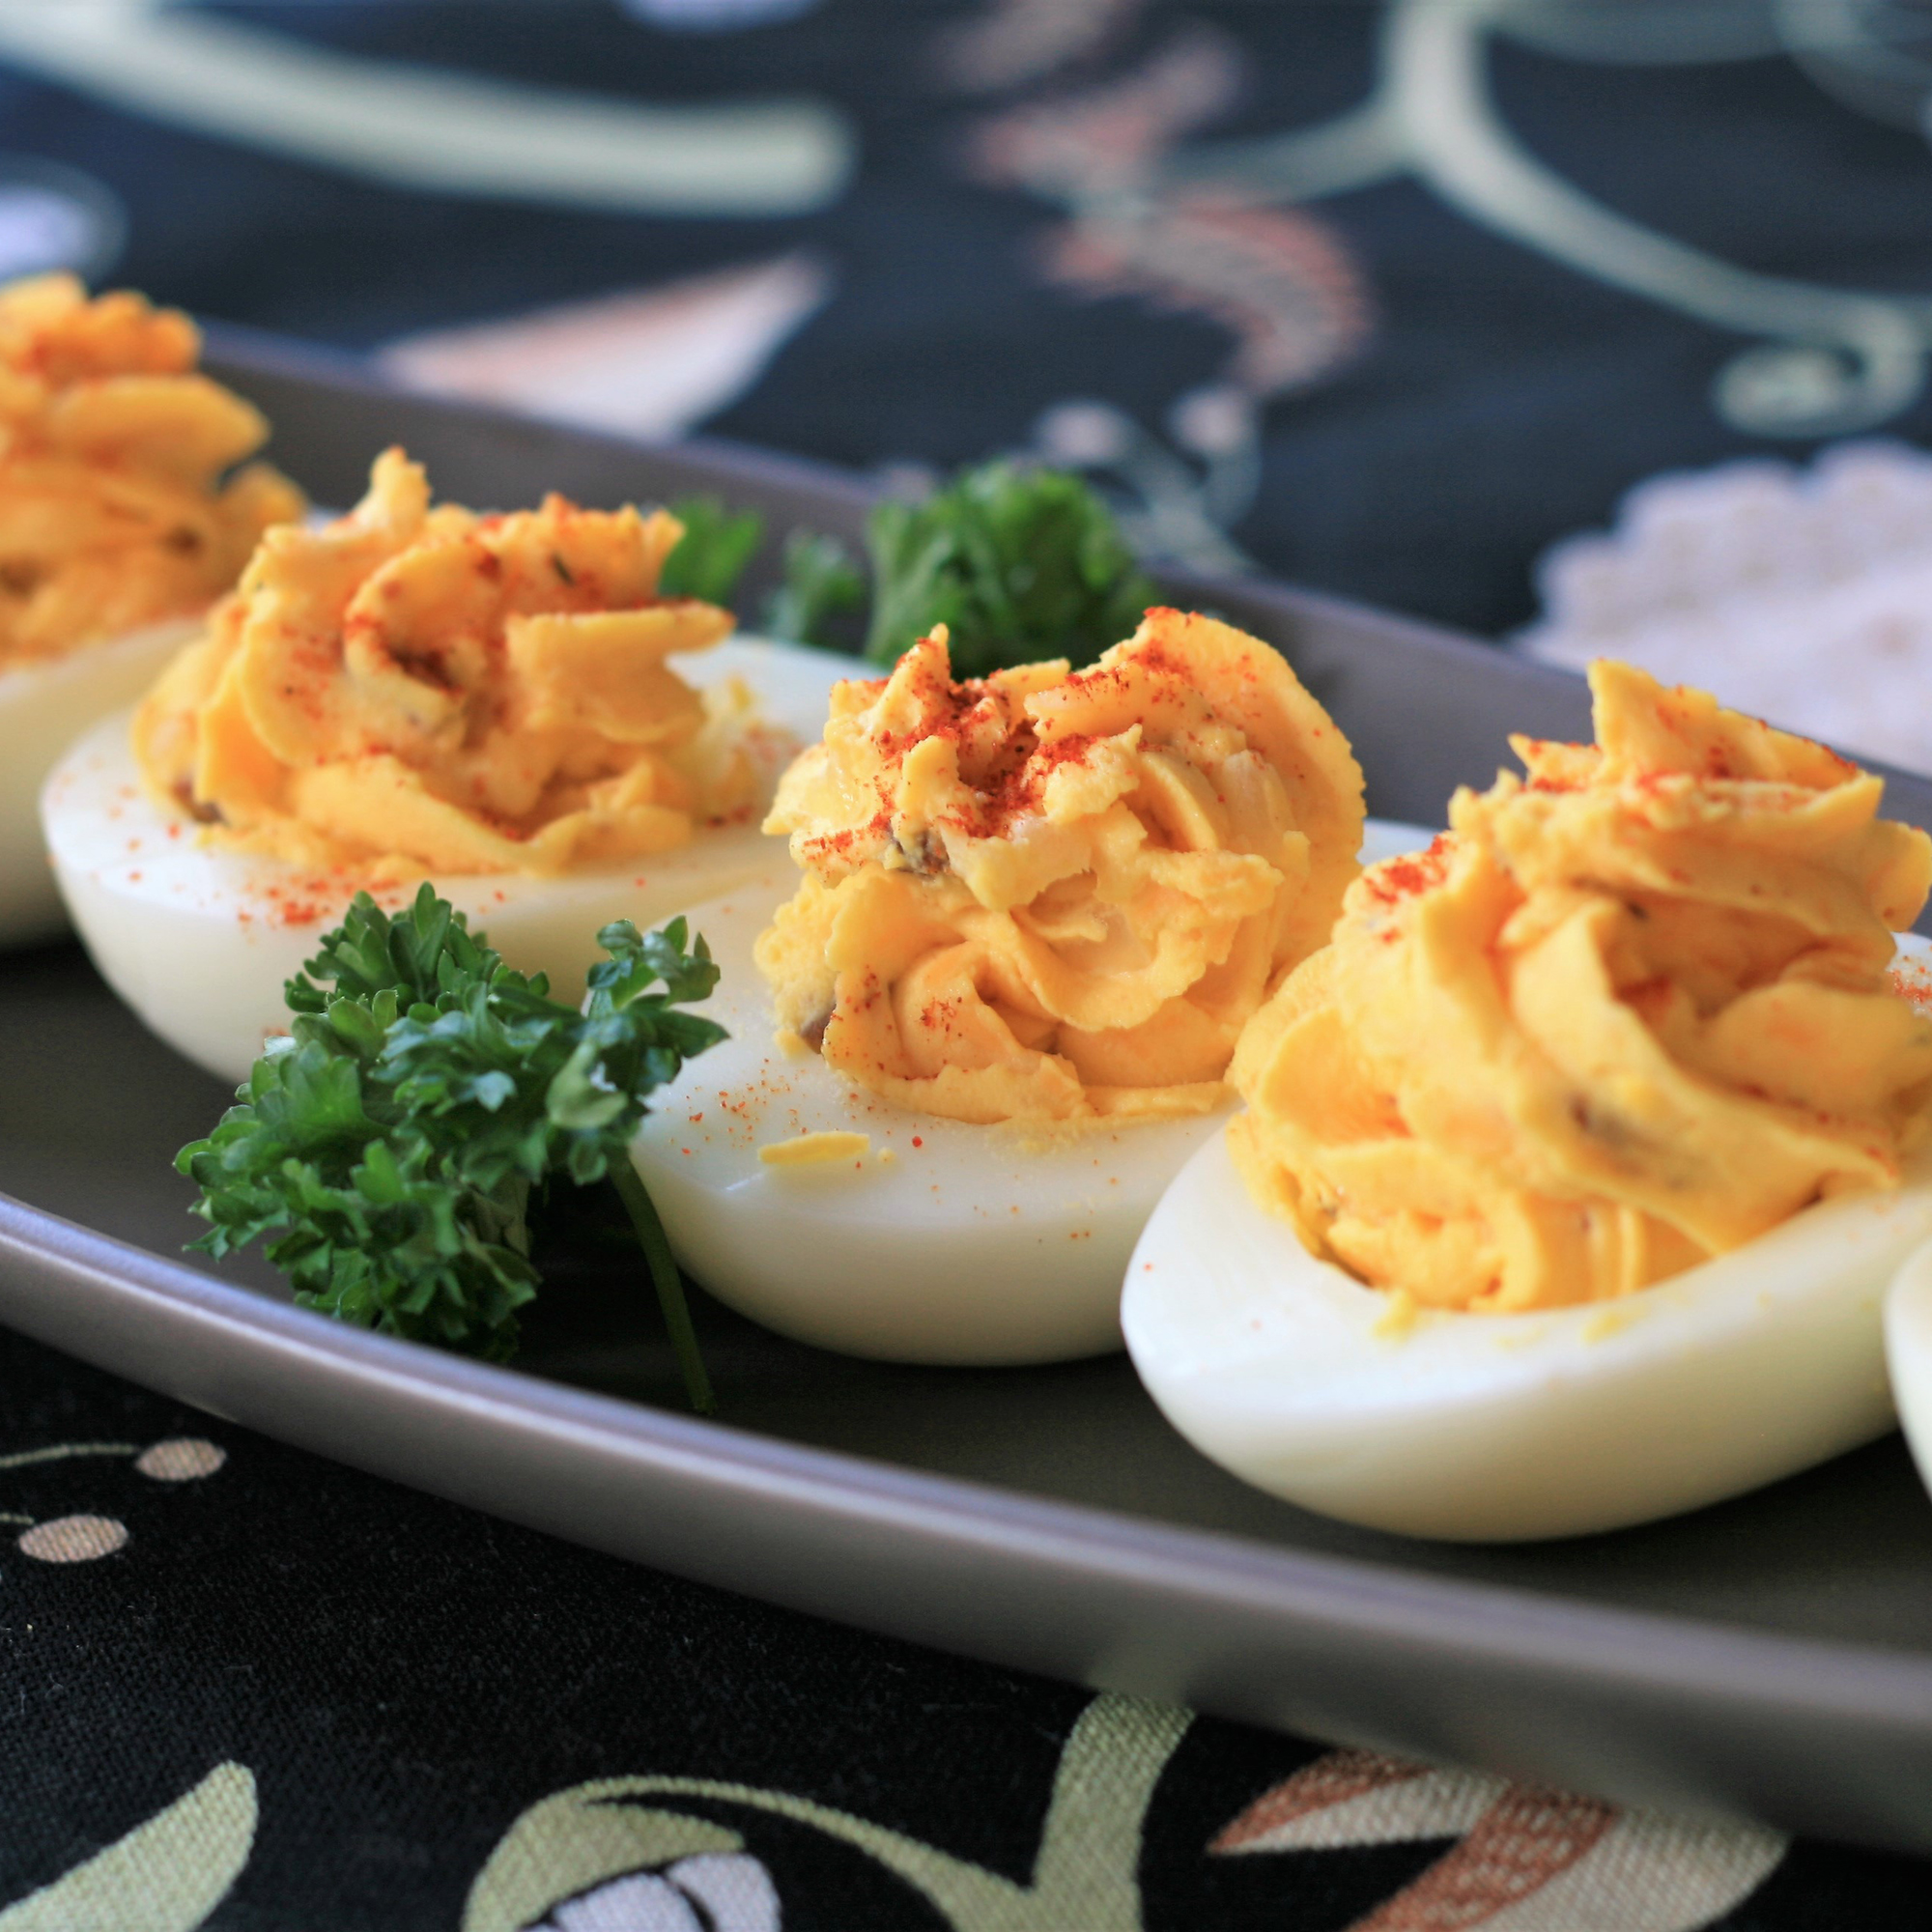 close up view of Deviled Eggs garnished with pepper and fresh herbs on a plate